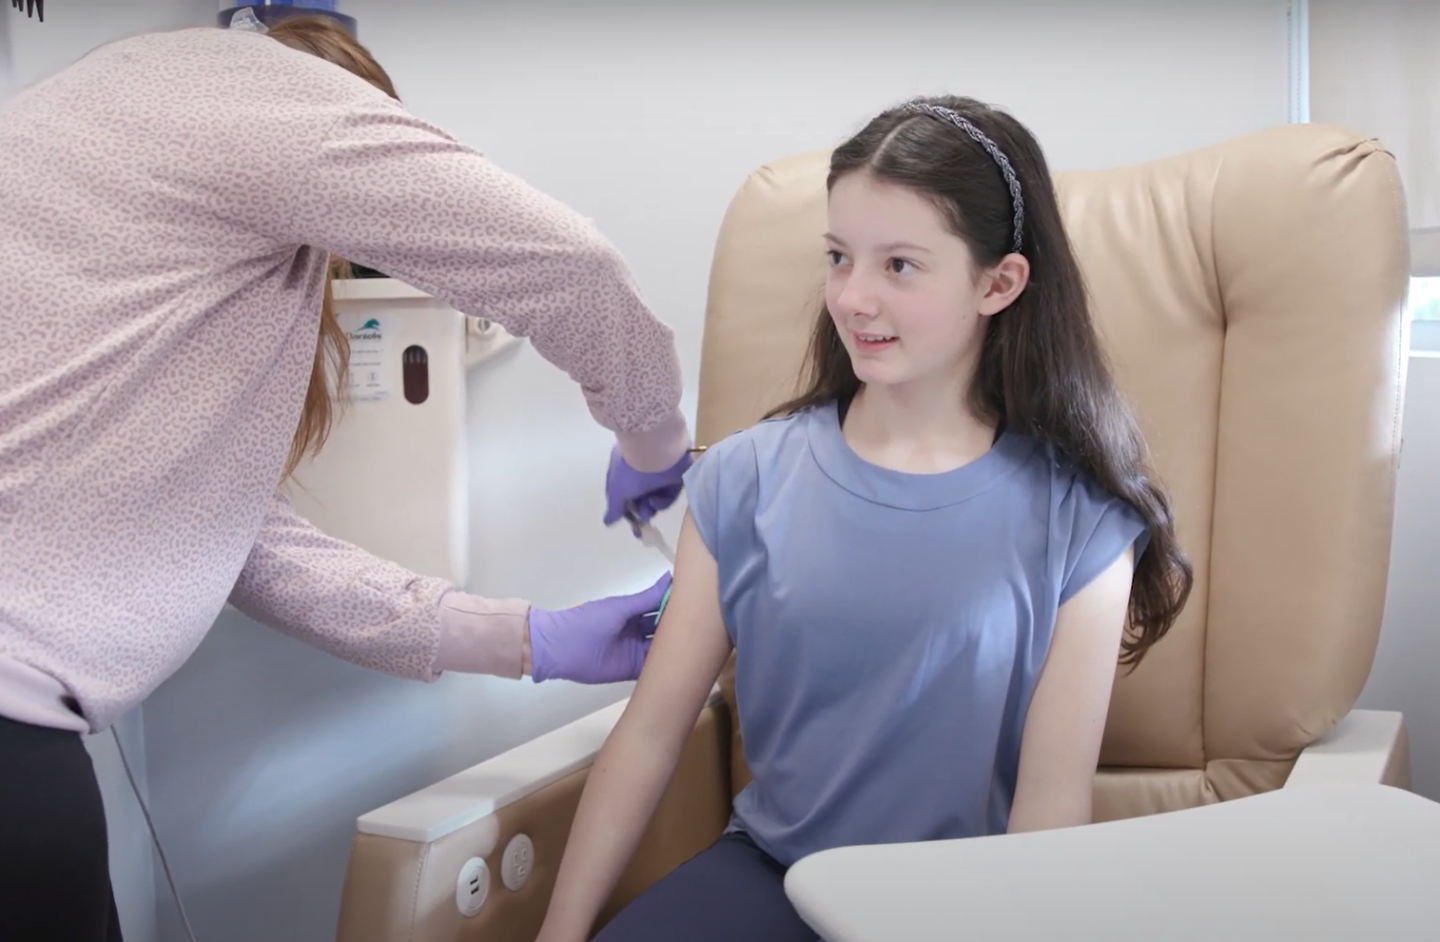 A child gets a shot from a doctor.